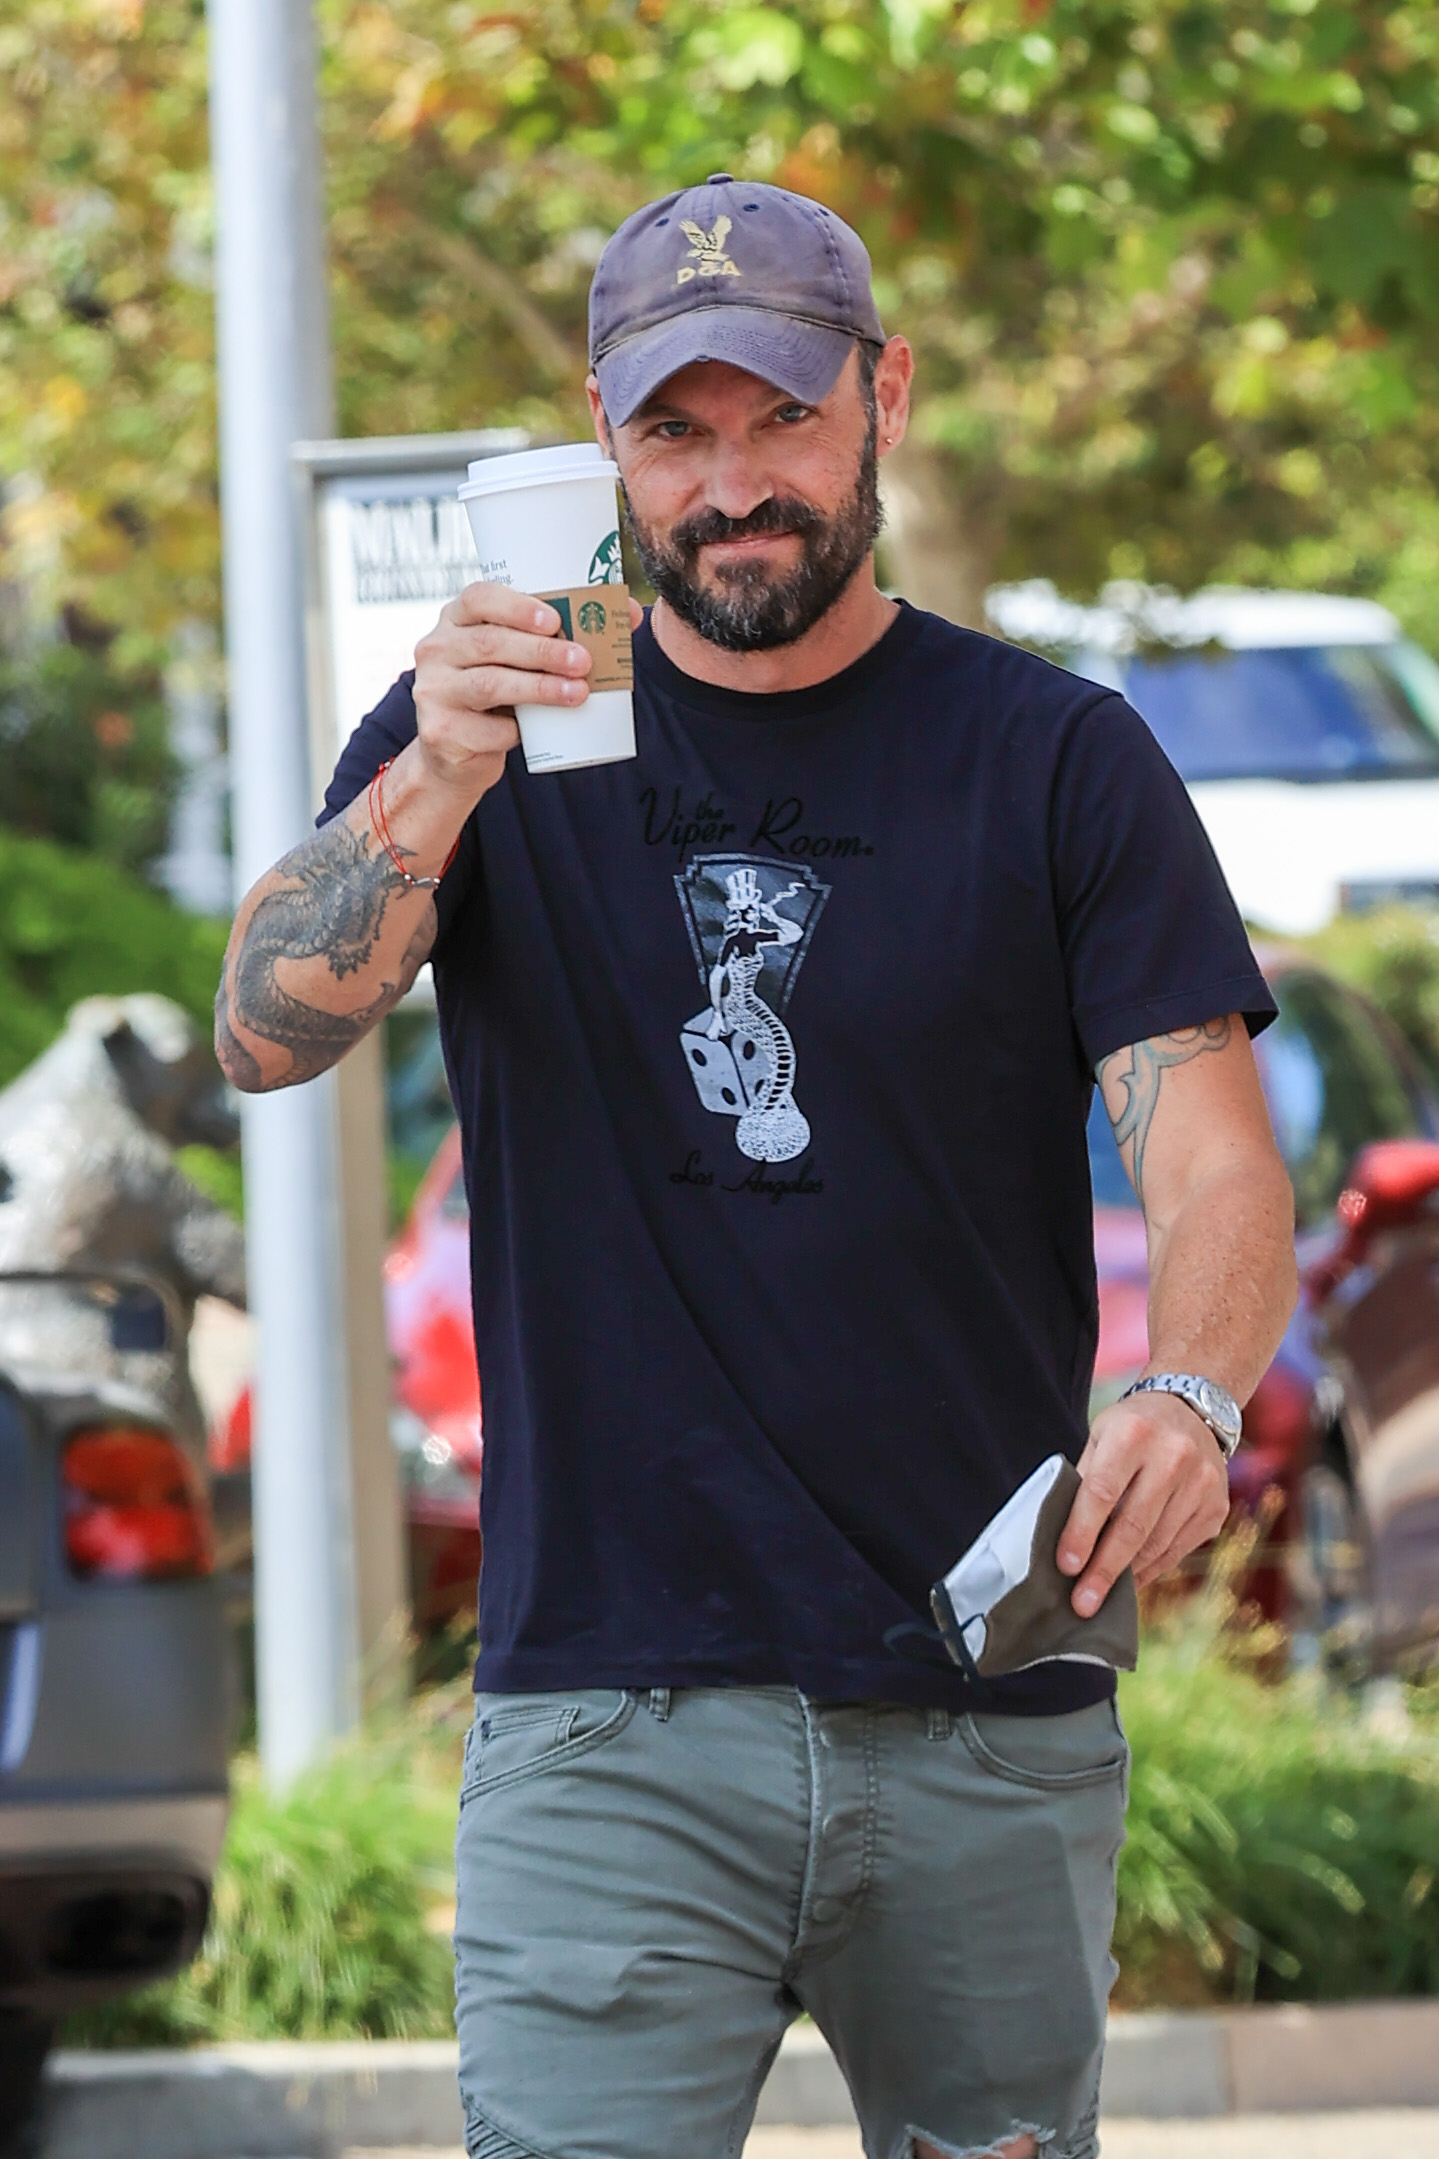 EXCLUSIVE: Brian Austin Green is in a cheery mood grabbing his morning coffee from Starbucks in Malibu.
15 Jul 2020,Image: 543418981, License: Rights-managed, Restrictions: World Rights, Model Release: no, Credit line: Rachpoot/MEGA / The Mega Agency / Profimedia